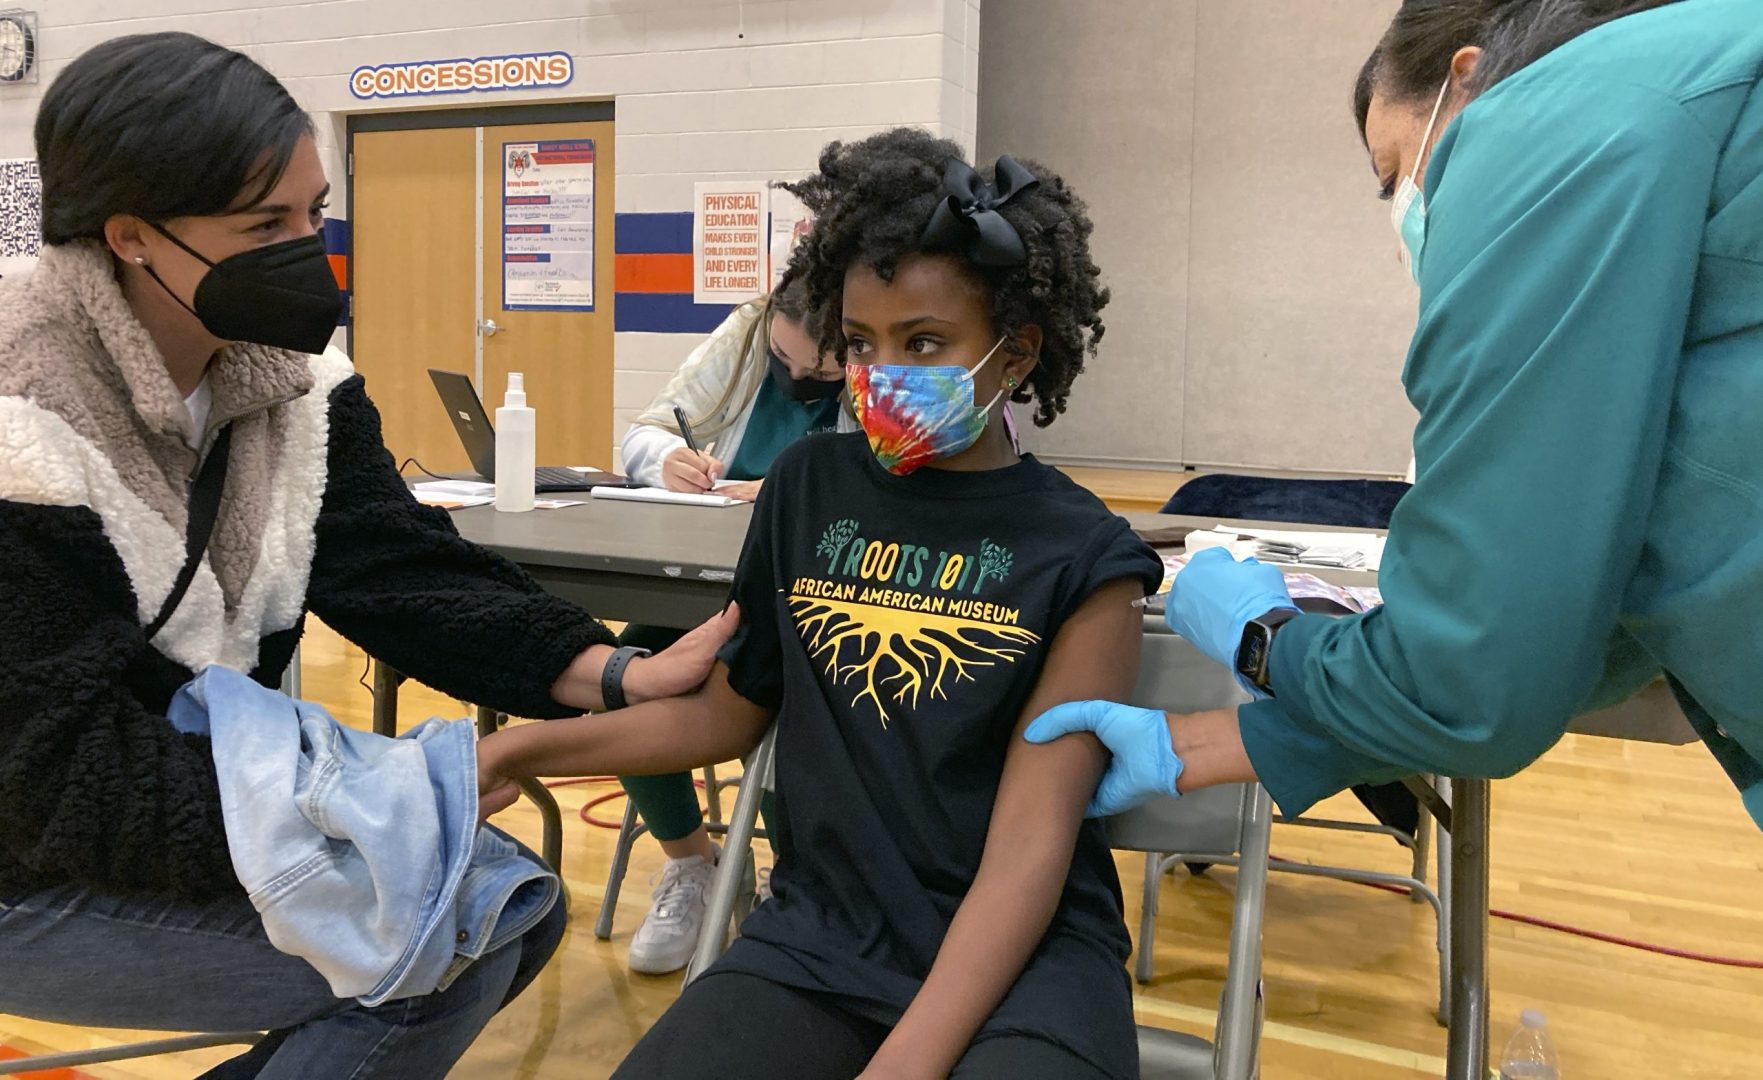 Cadell Walker comforts her daughter Solome, 9, as nurse Cindy Haskins administers a Pfizer COVID-19 shot at a vaccination clinic for young students at Ramsey Middle School on Saturday, Nov. 13, 2021 in Louisville, Ky.  